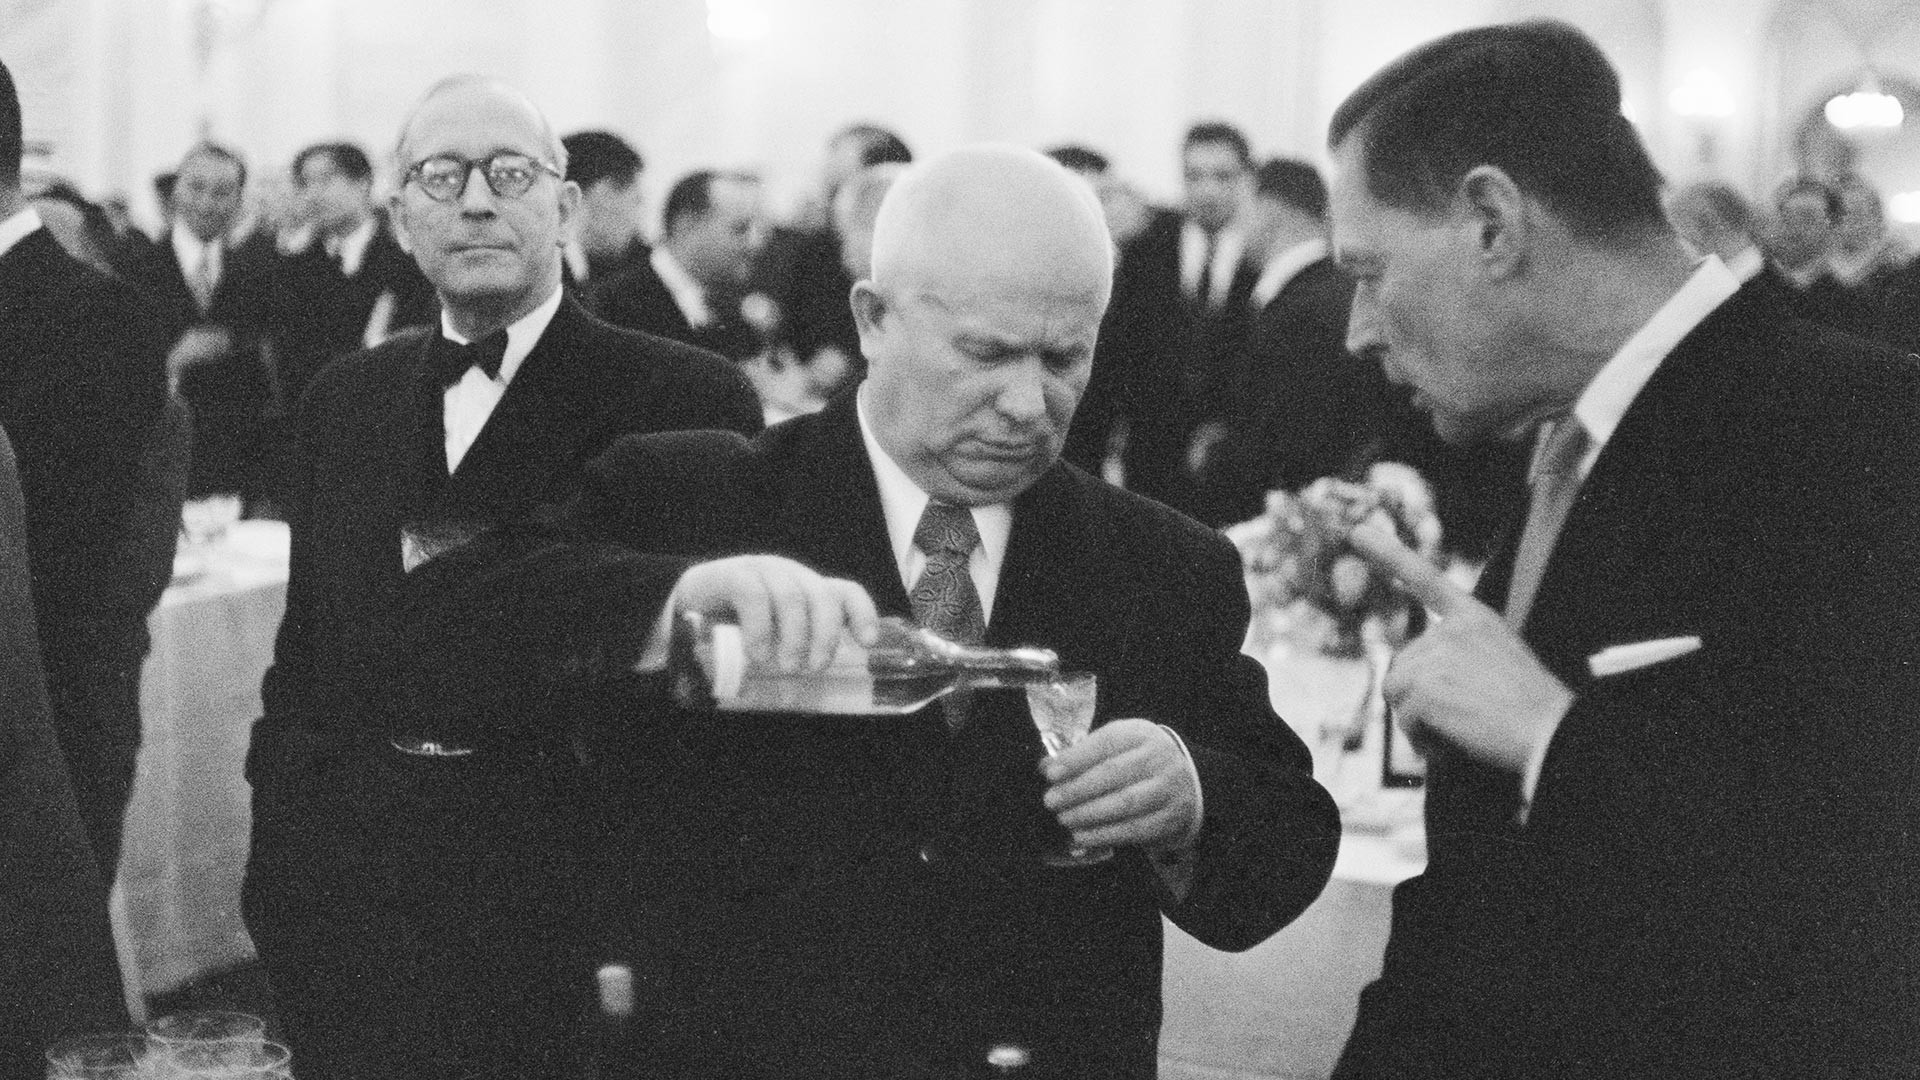 Nikita Khrushchev drinking with Charles E Bohlen, the US Ambassador to the Soviet Union, at an official function, 1955